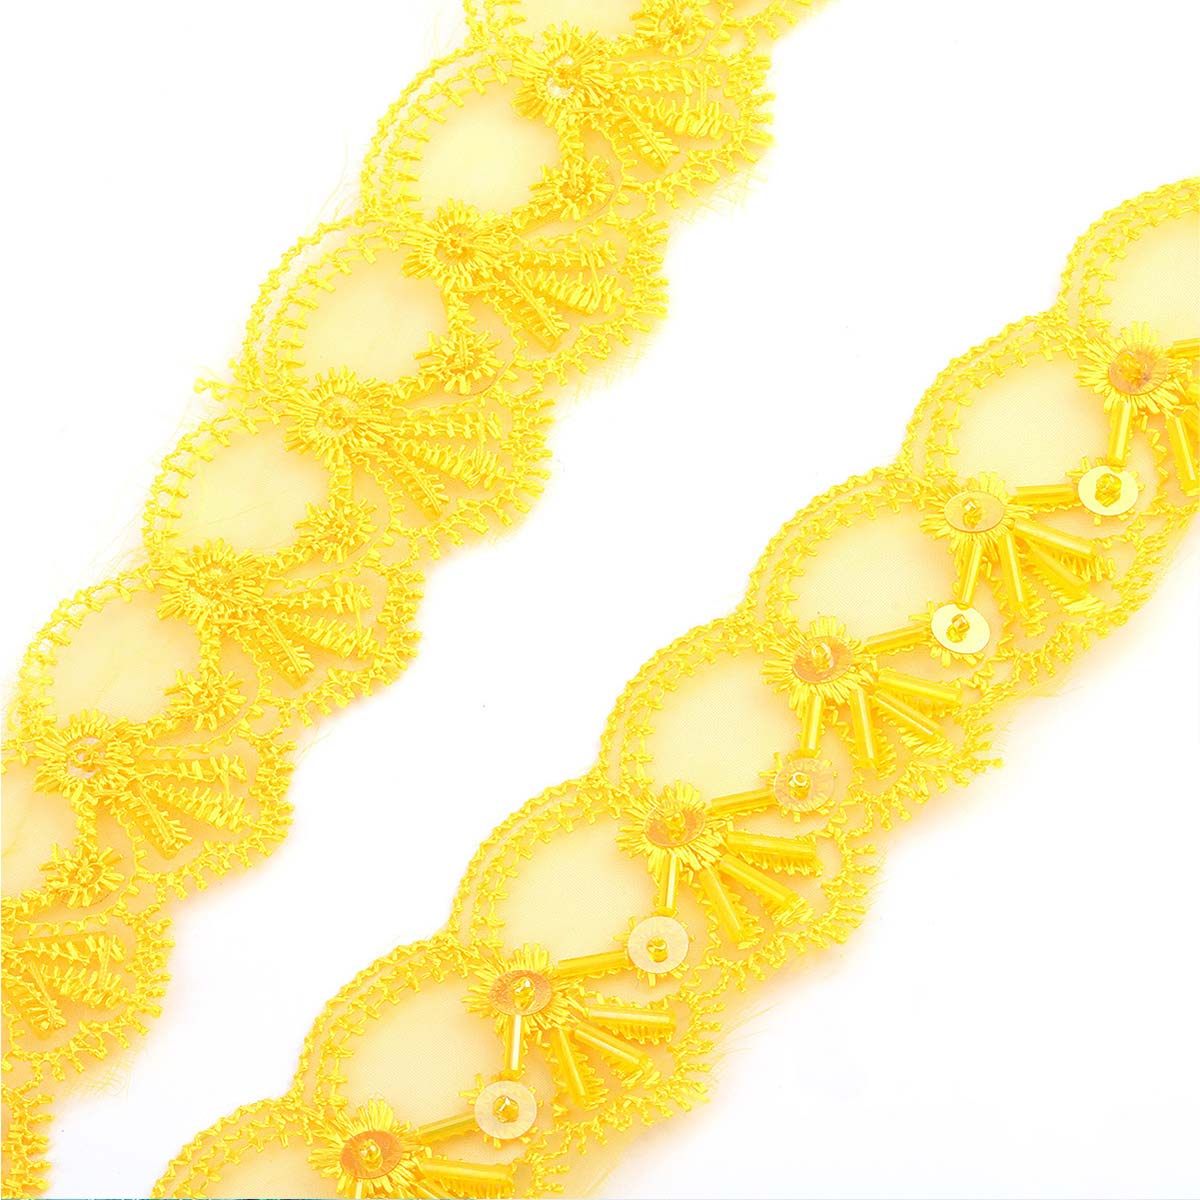 Sequin Lace Fabric yellow